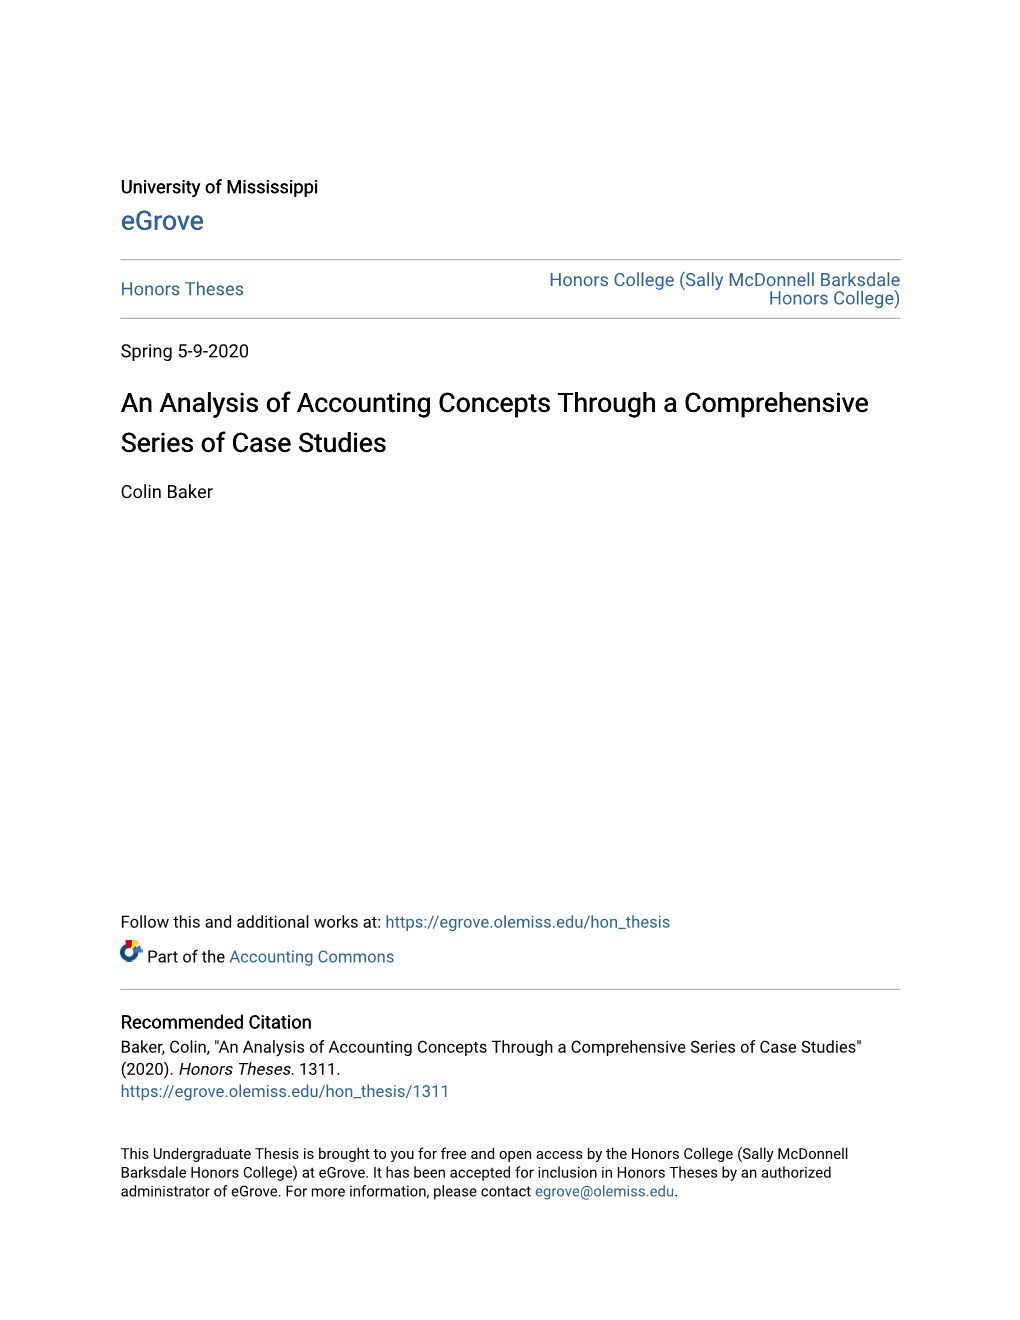 An Analysis of Accounting Concepts Through a Comprehensive Series of Case Studies